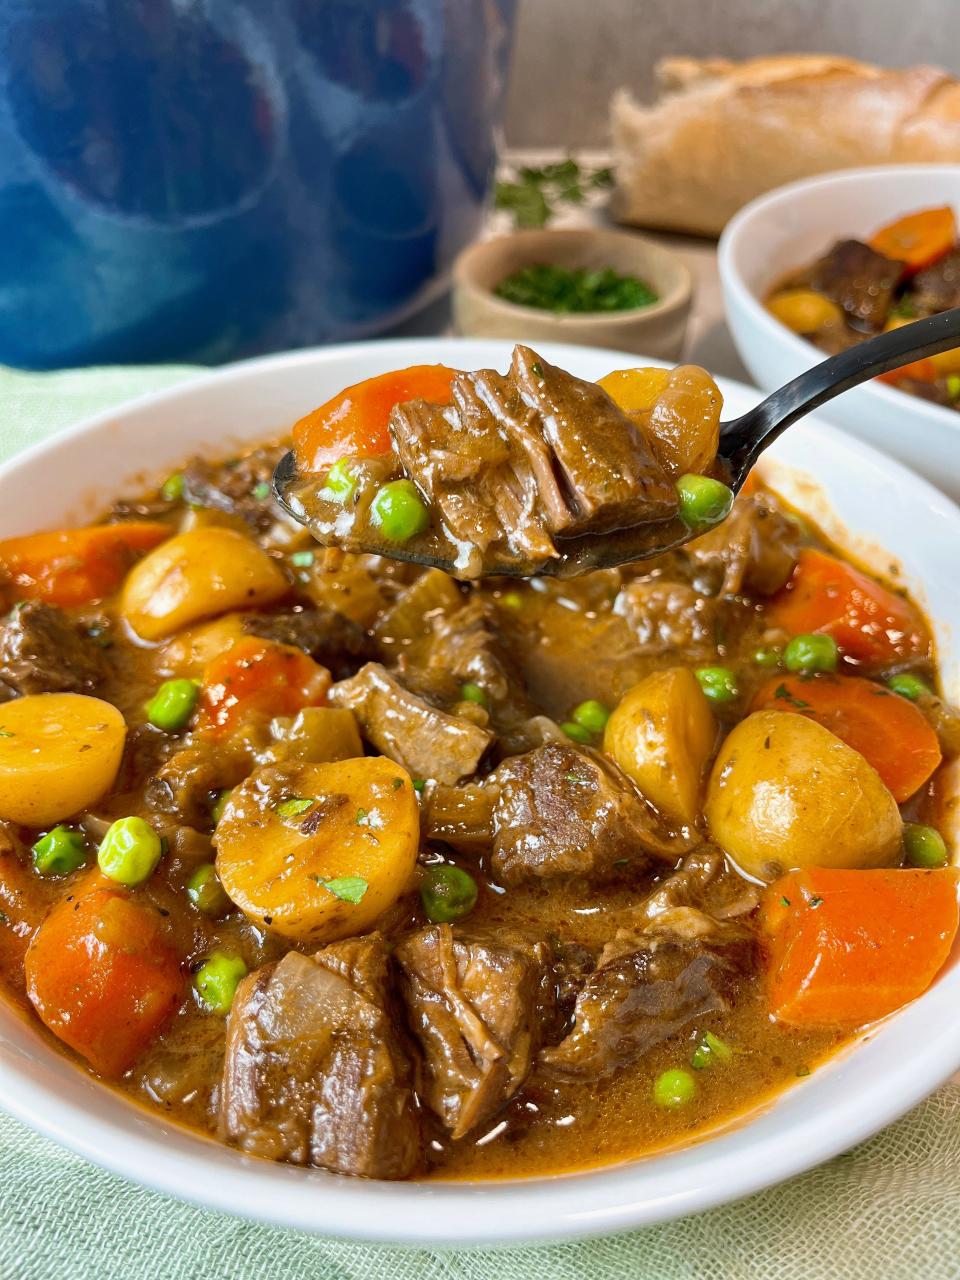 Beef stew is a one-pot meal that's pure comfort.